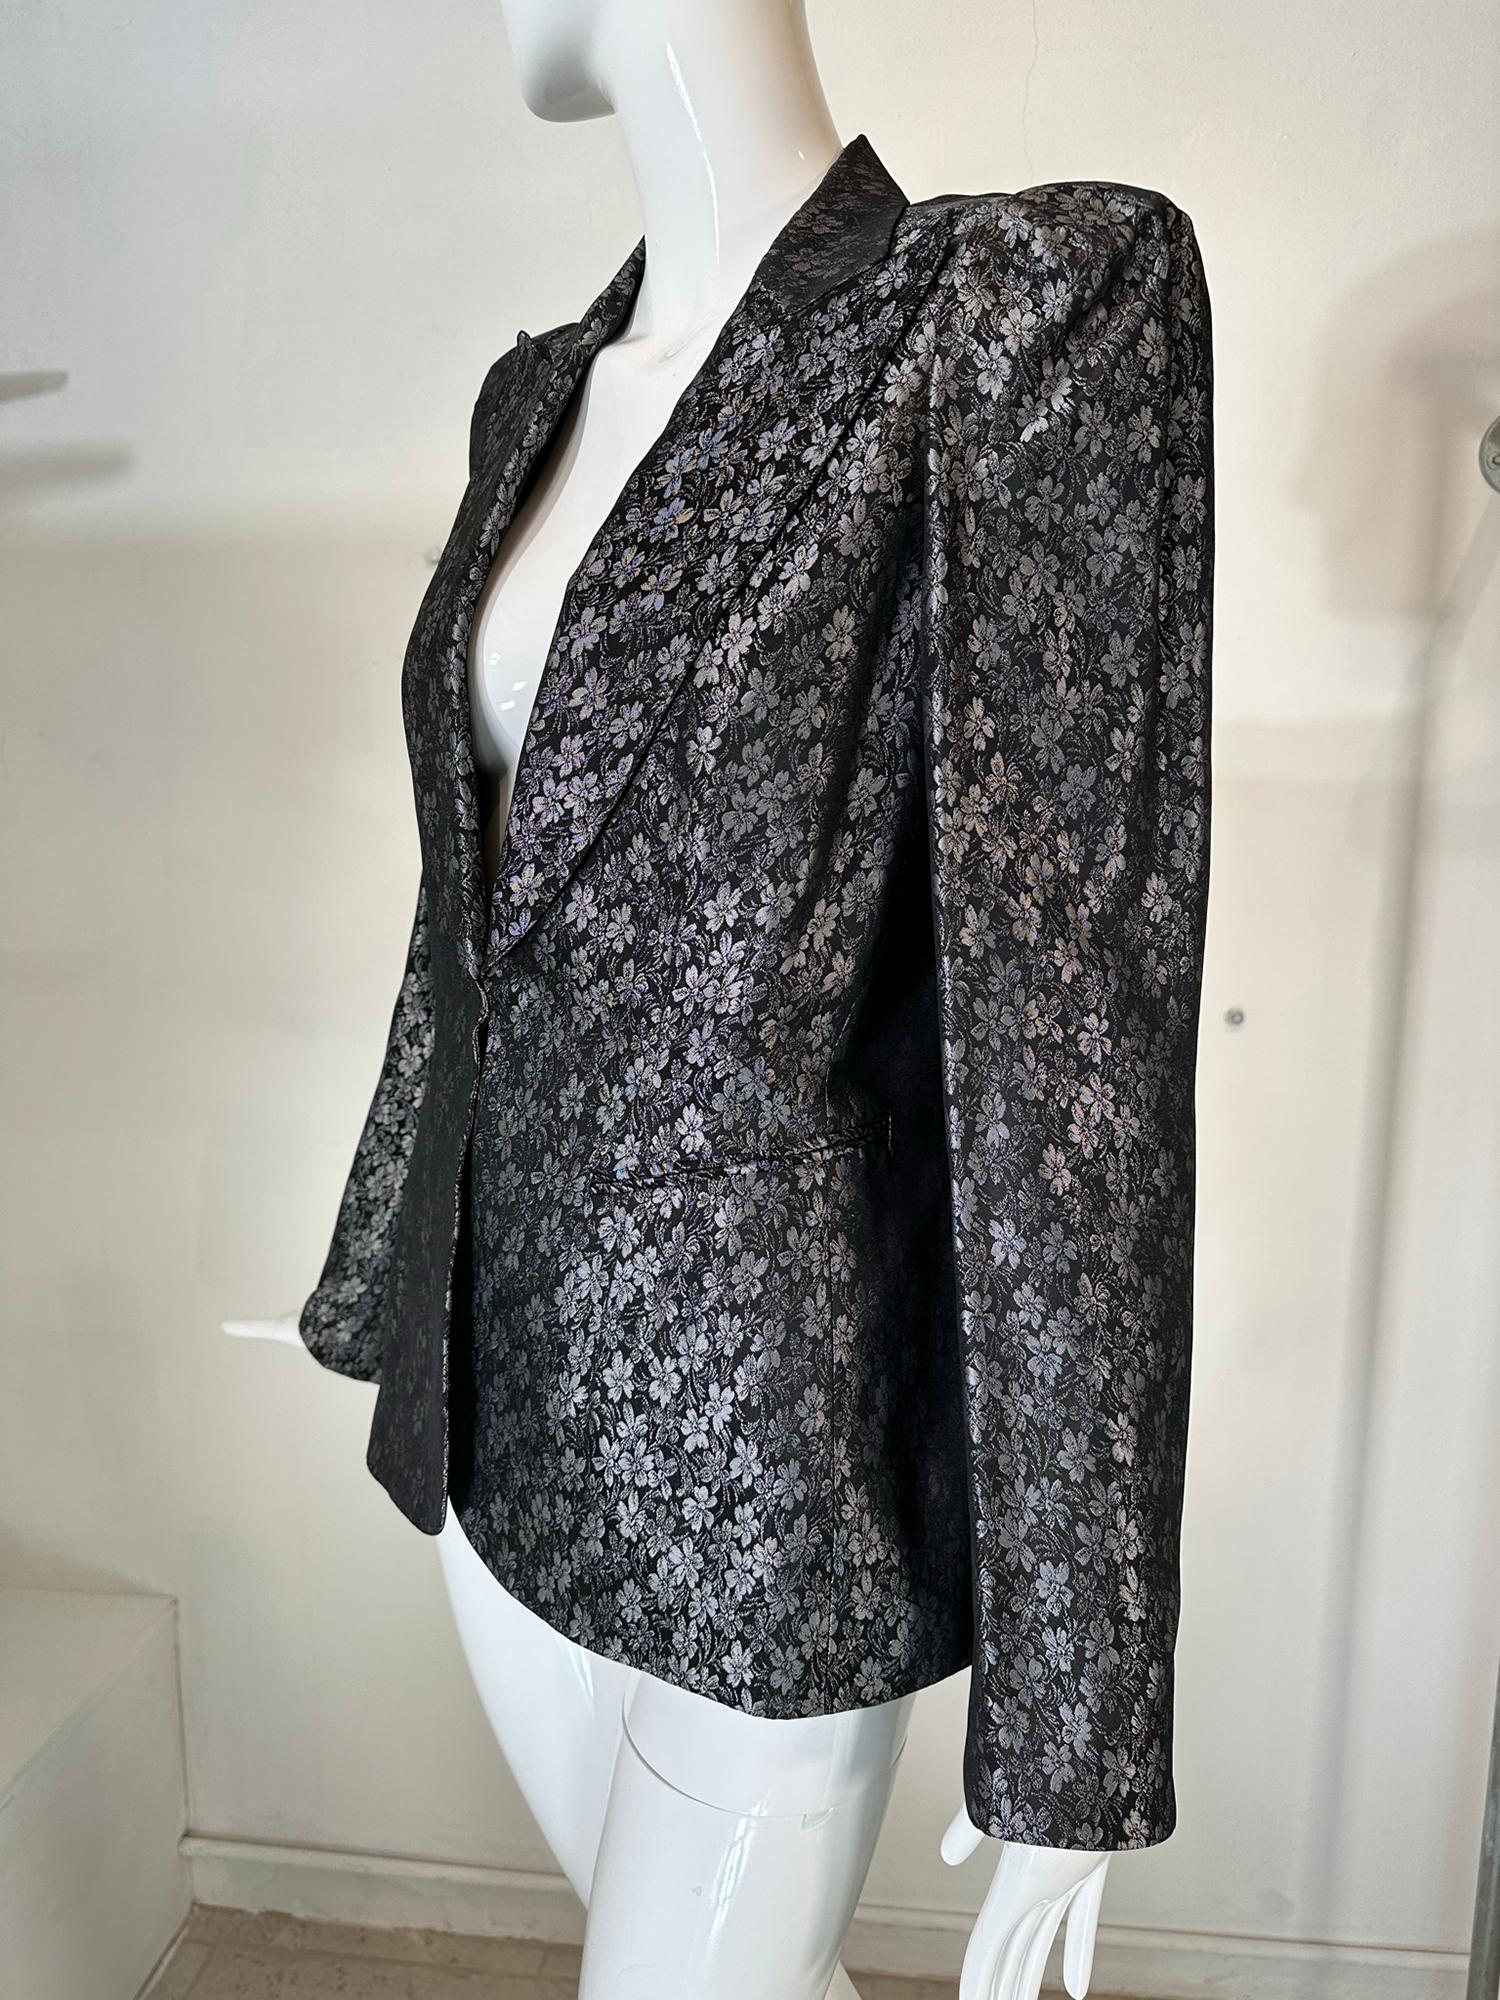 Richard Tyler Black & Silver Brocade Tailored Single Breasted Jacket 1990s For Sale 7